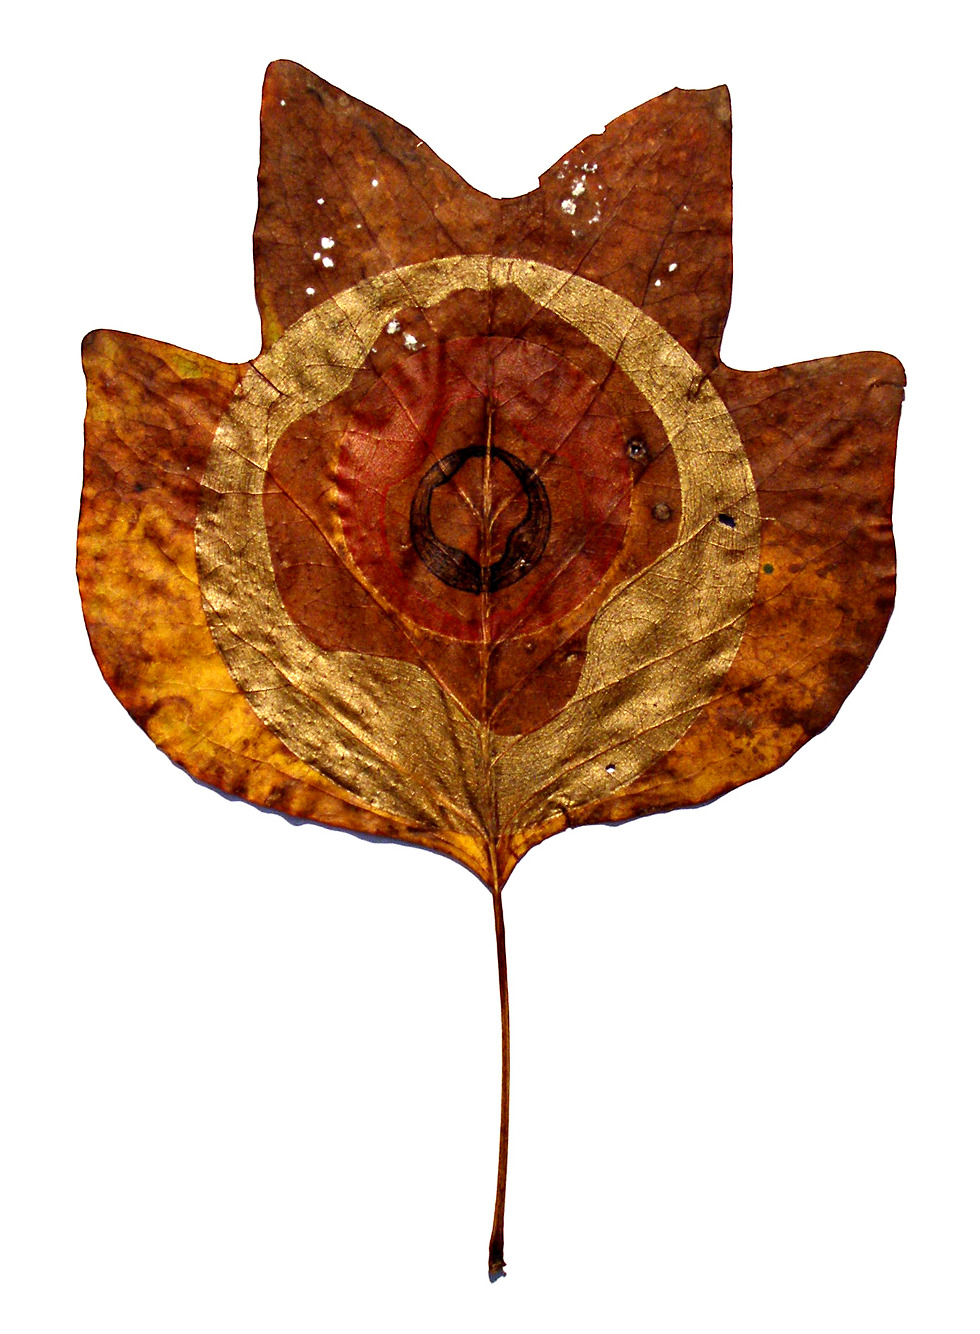 Tulip Leaf Print  by <a href='http://www.jessicabaker.net' target='_blank'>Jessica Baker</a>